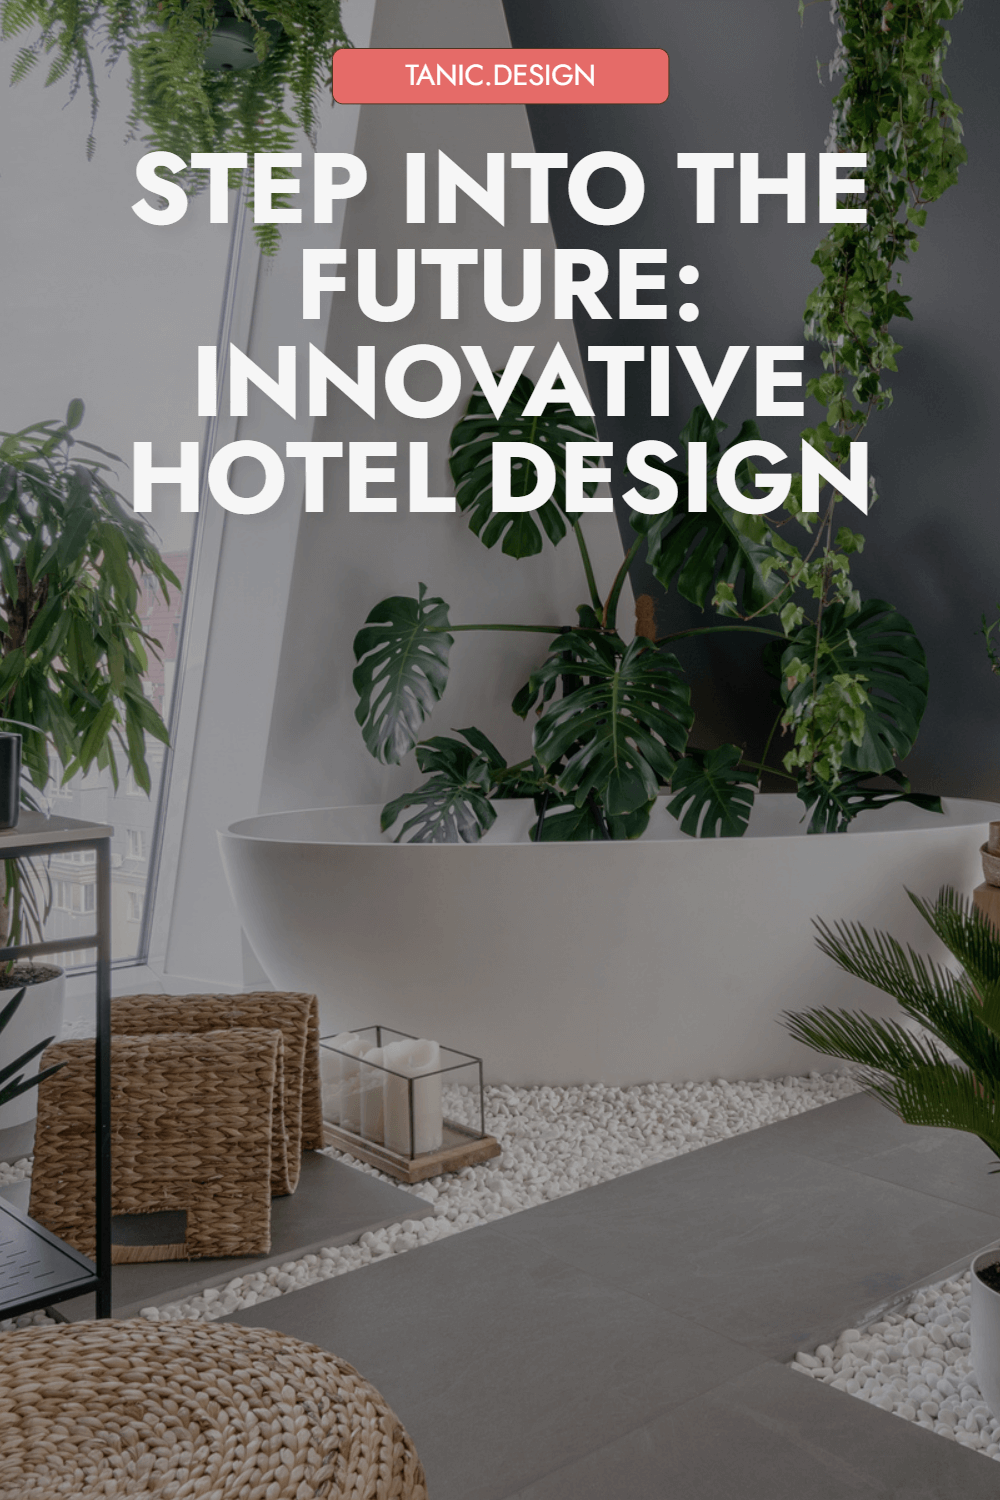 Innovative Hotel Design for Enhanced Guest Experiences